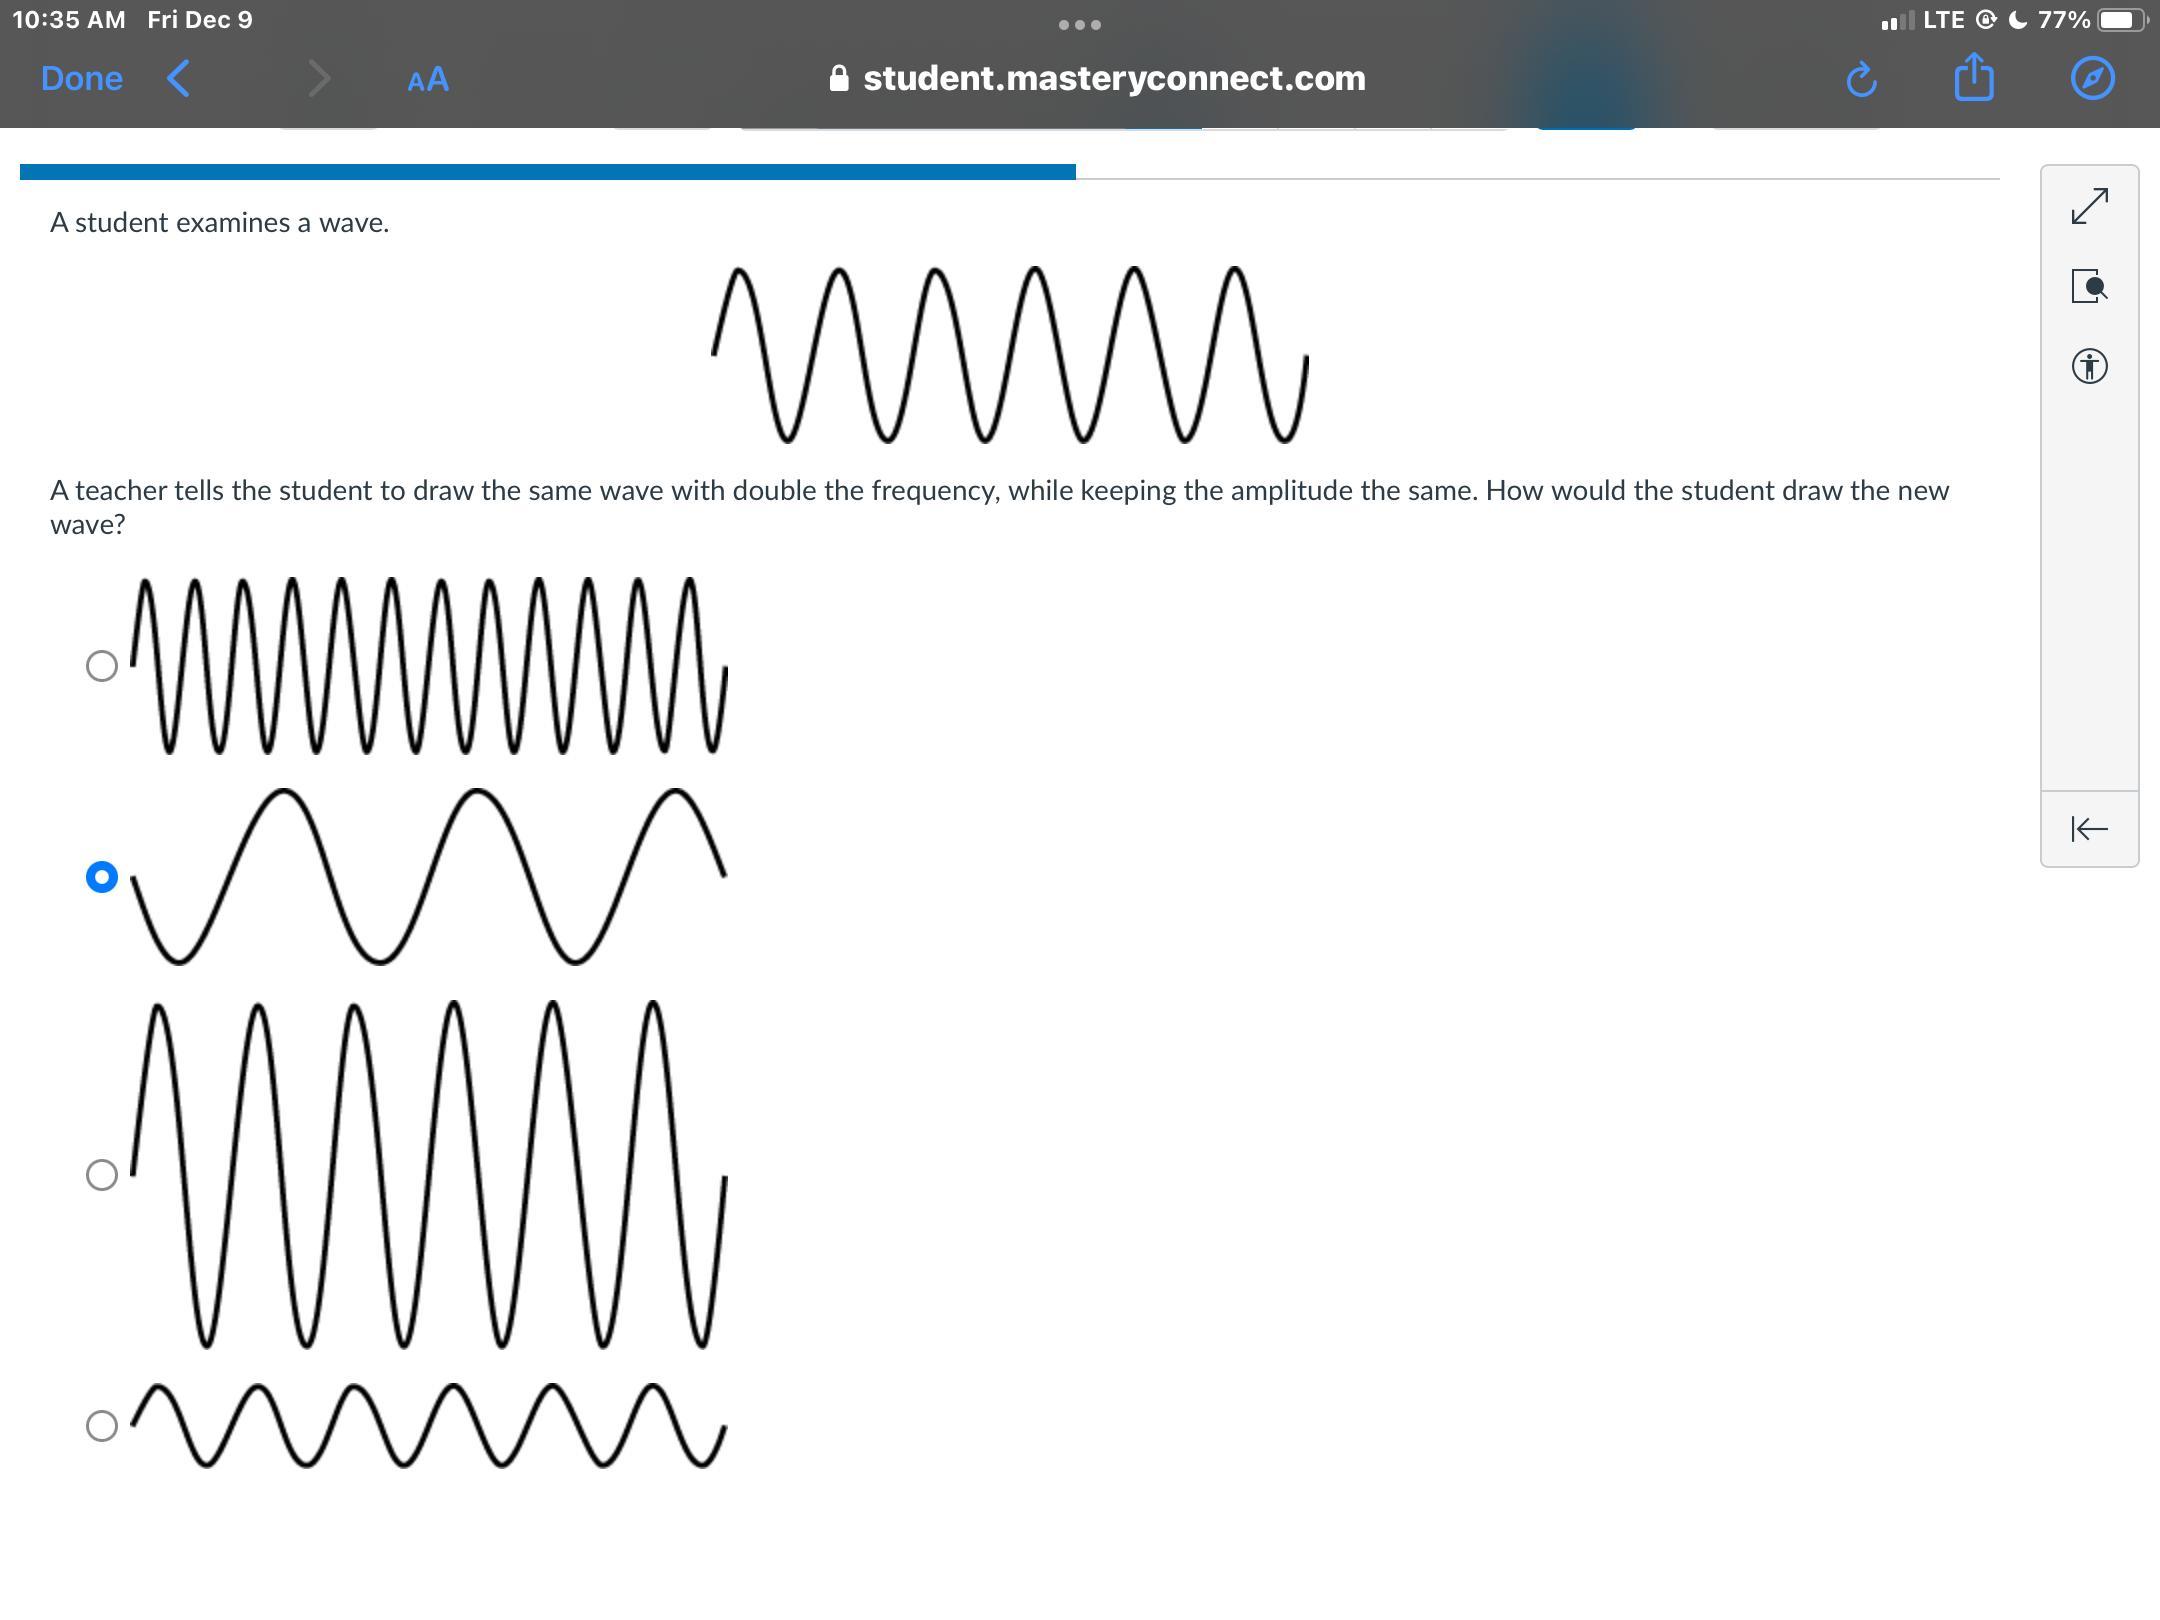 Teacher Tells The Student To Draw The Same Wave With Double The Frequency, While Keeping The Amplitude